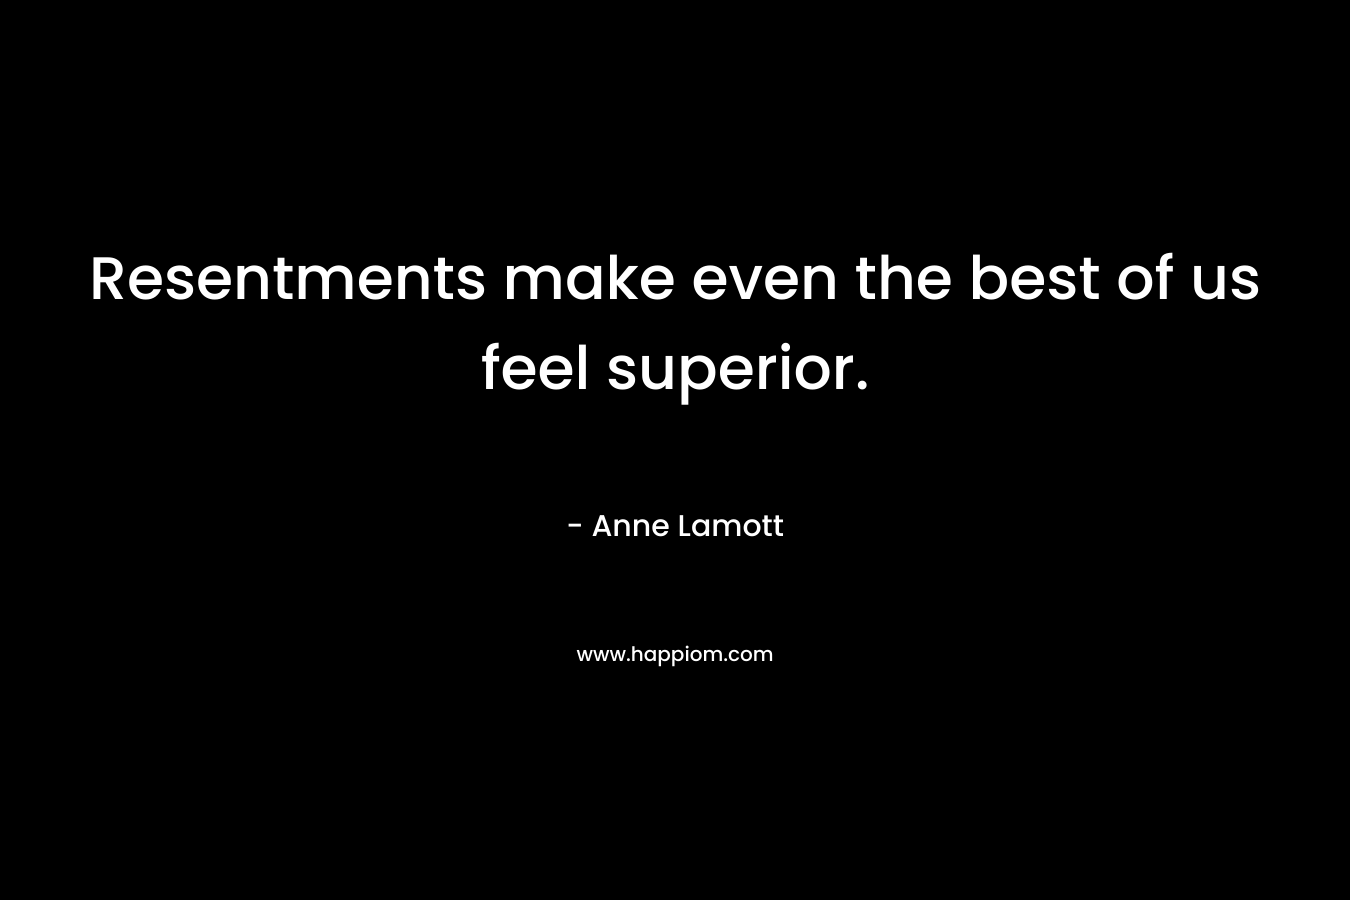 Resentments make even the best of us feel superior. – Anne Lamott